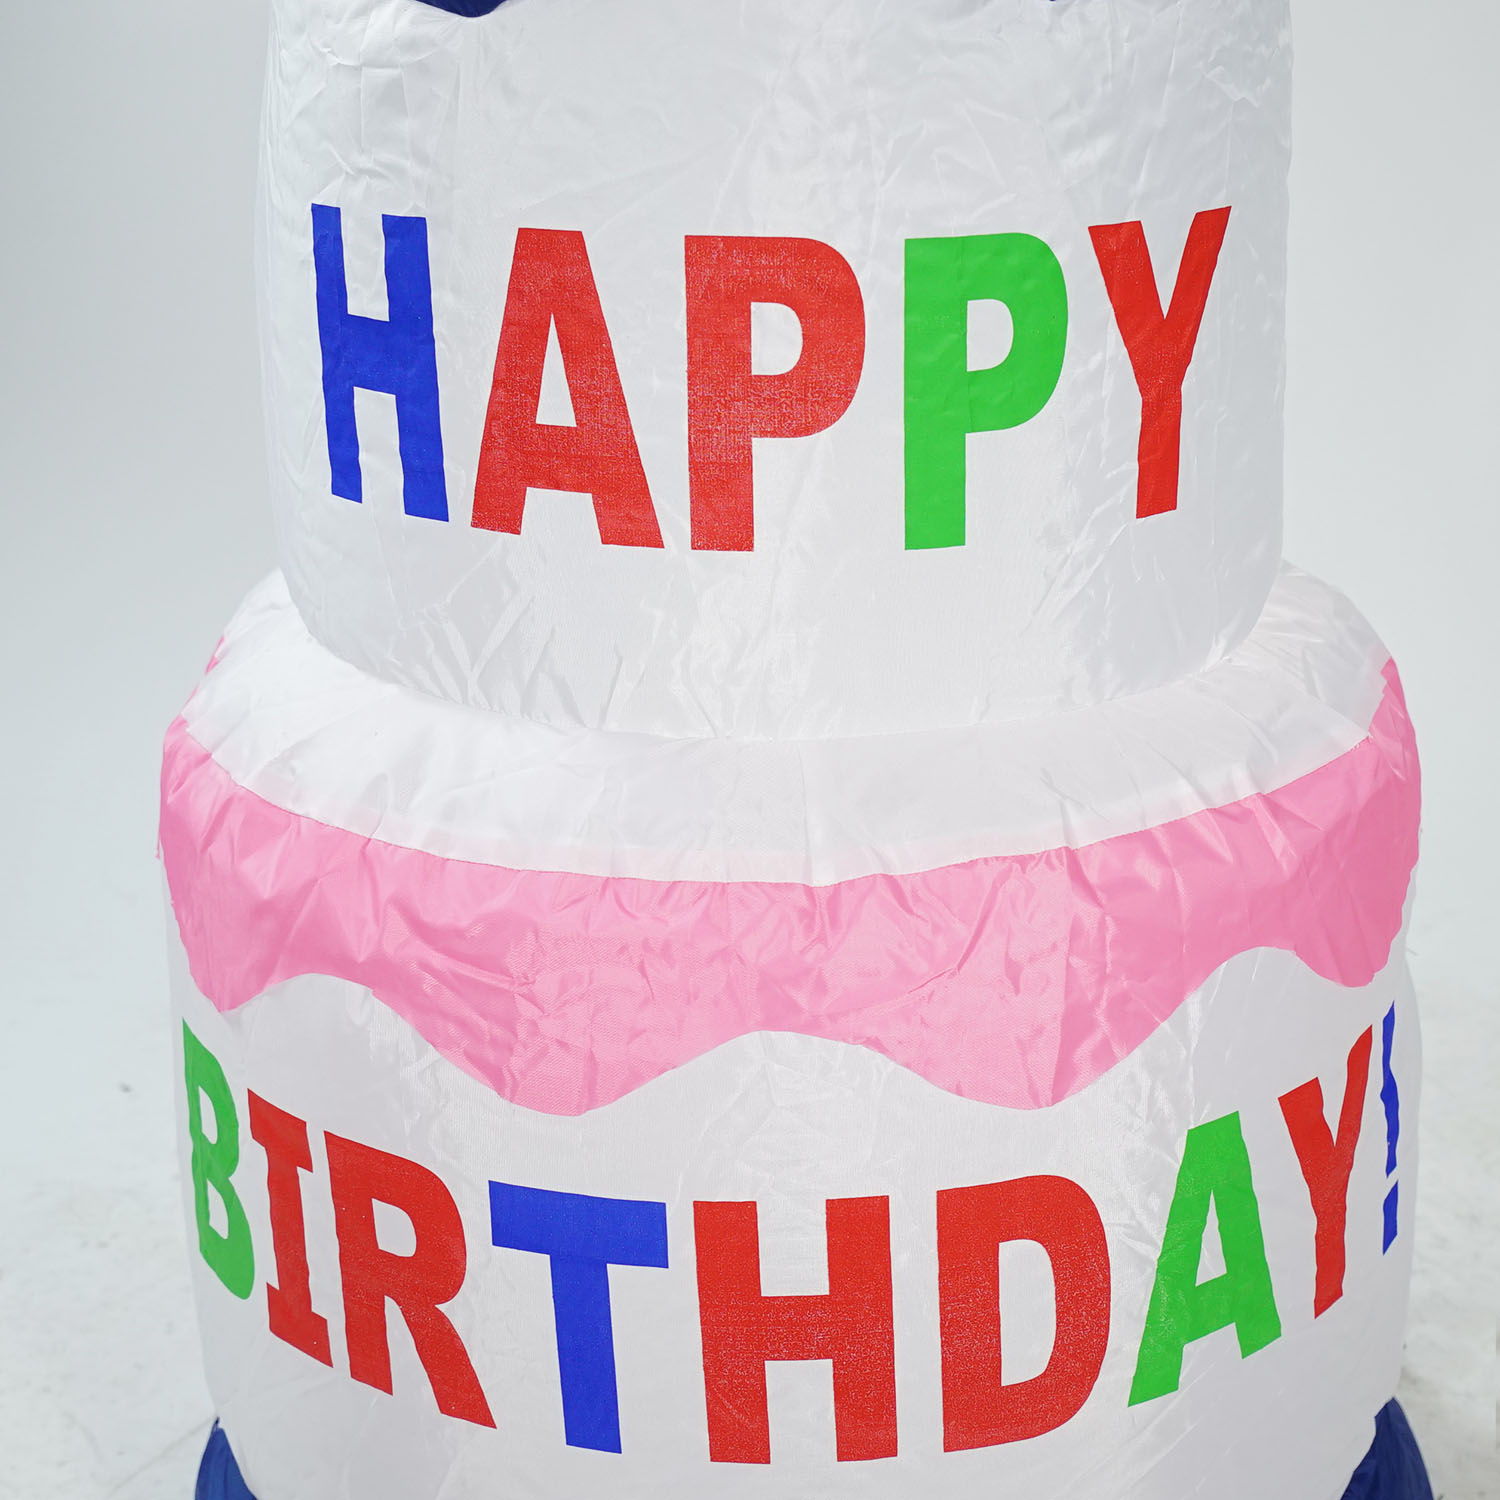 Northlight 4' Inflatable Lighted Happy Birthday Cake Outdoor Decoration - image 3 of 5